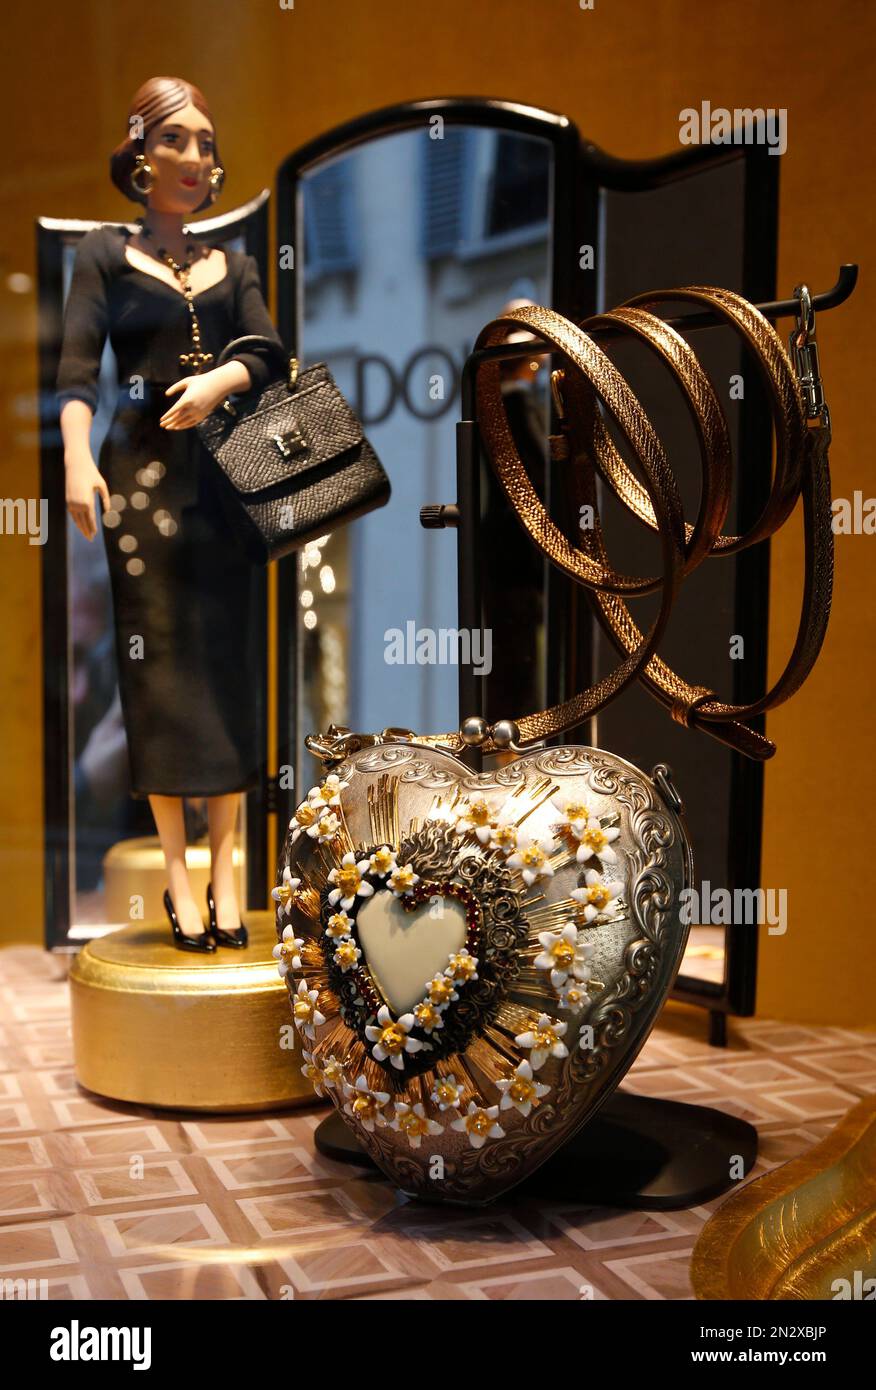 Billionaires Newswire - .1001 Nights Diamond Purse” by House of Mouawad. |  Facebook